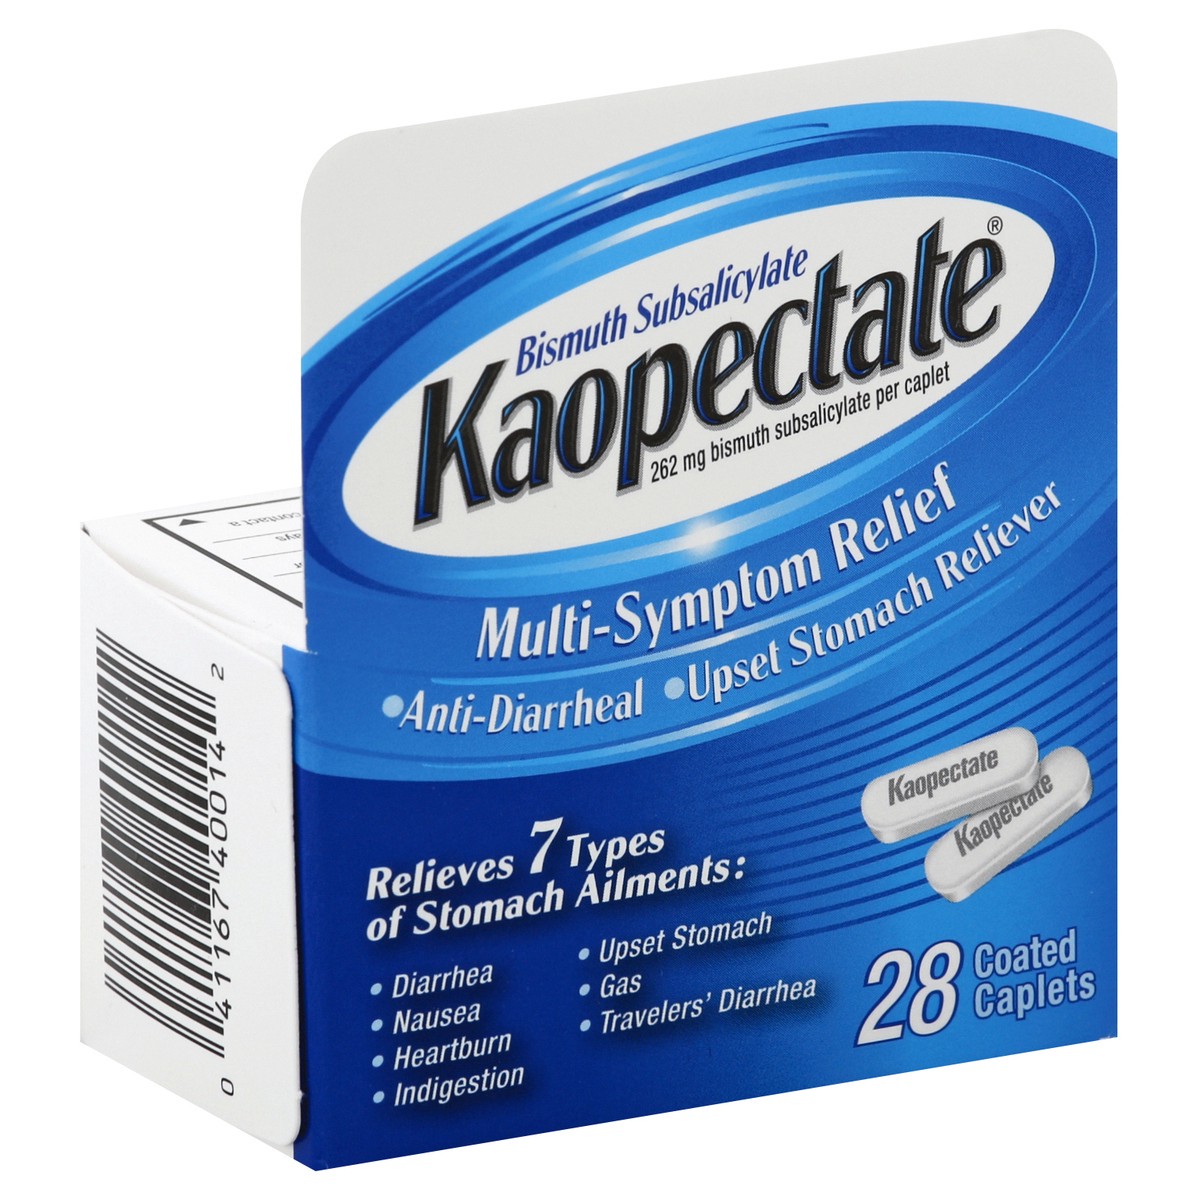 slide 6 of 7, Kaopectate Anti-Diarrheal/Upset Stomach Reliever 262 mg Multi-Symptom Relief Coated Caplets, 28 ct